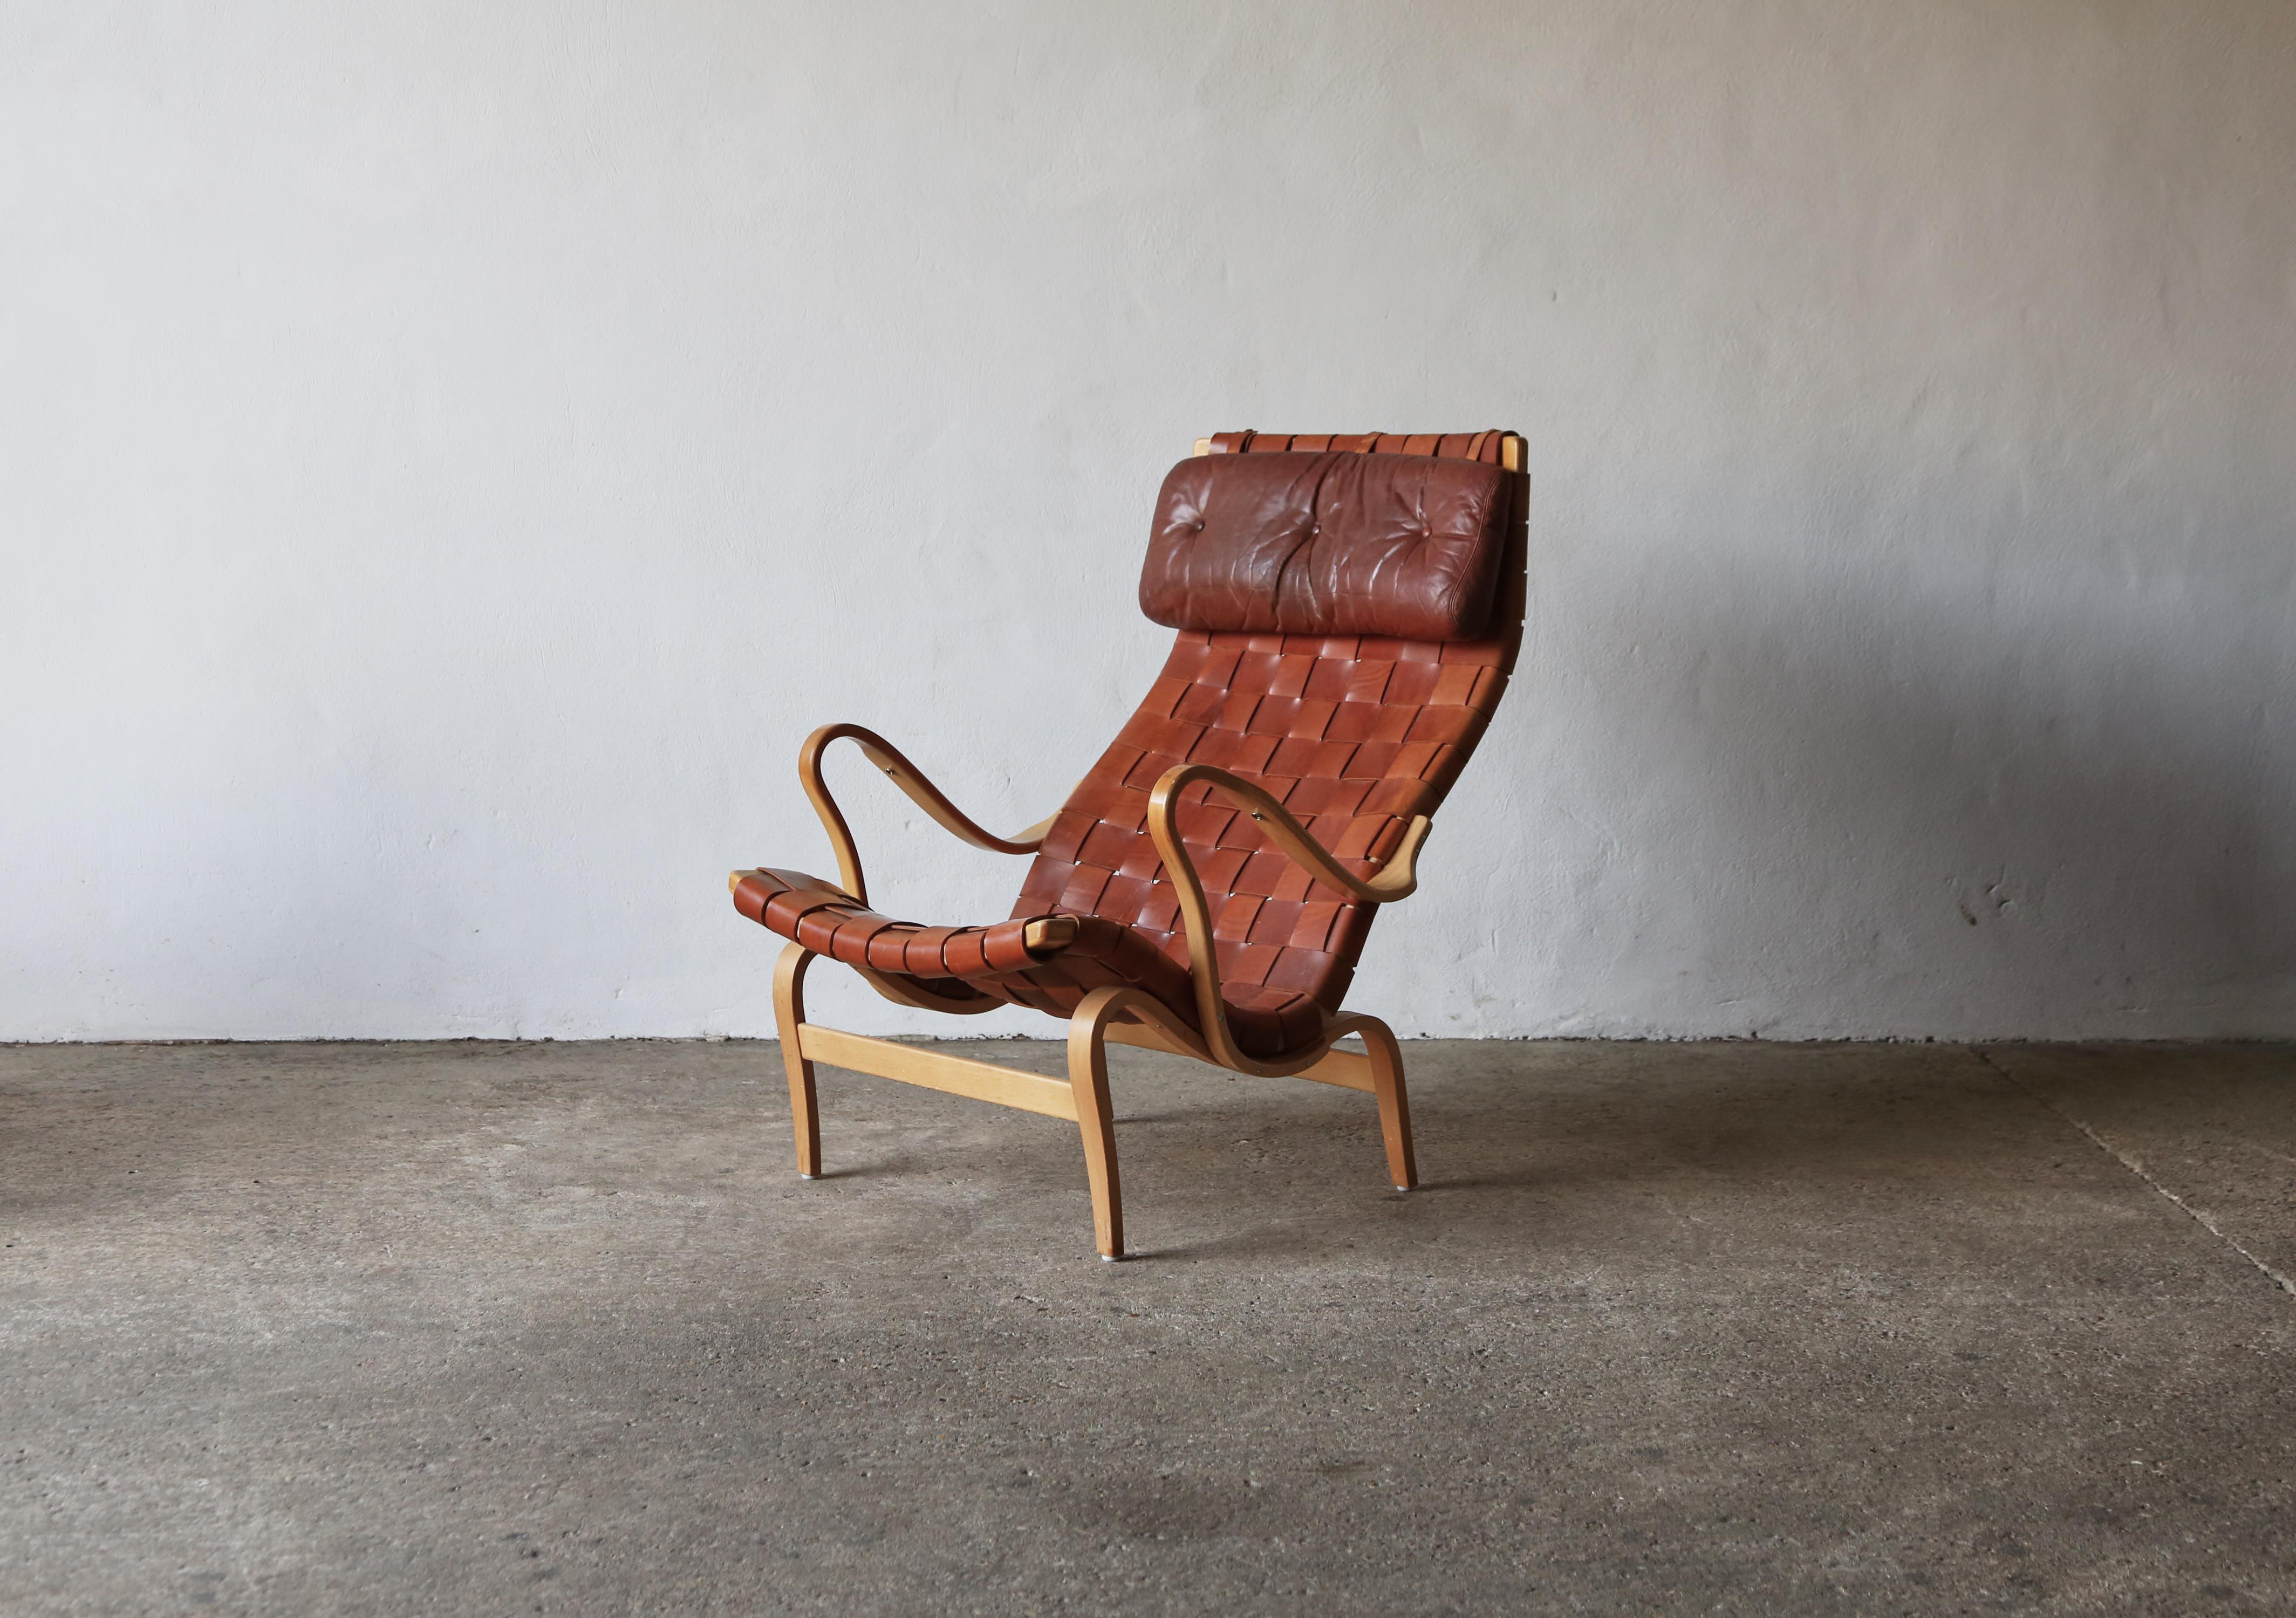 Rare Pernilla chair by Bruno Mathsson, for Dux, Sweden, 1960s. Beech and leather. Signed with branded manufacturer's mark. Fast shipping worldwide.



